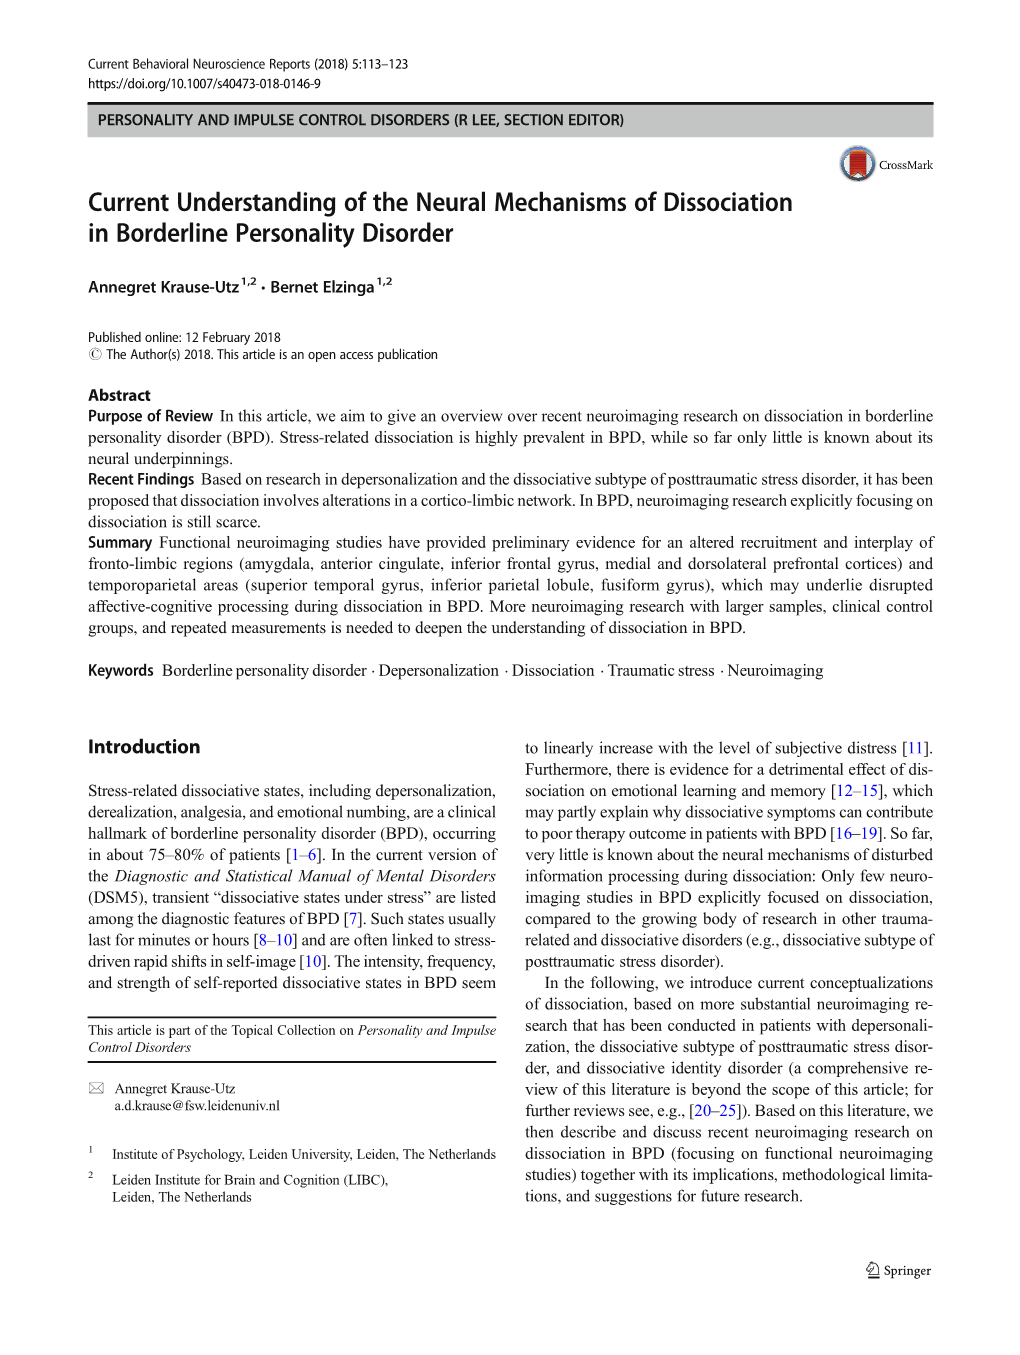 Current Understanding of the Neural Mechanisms of Dissociation in Borderline Personality Disorder